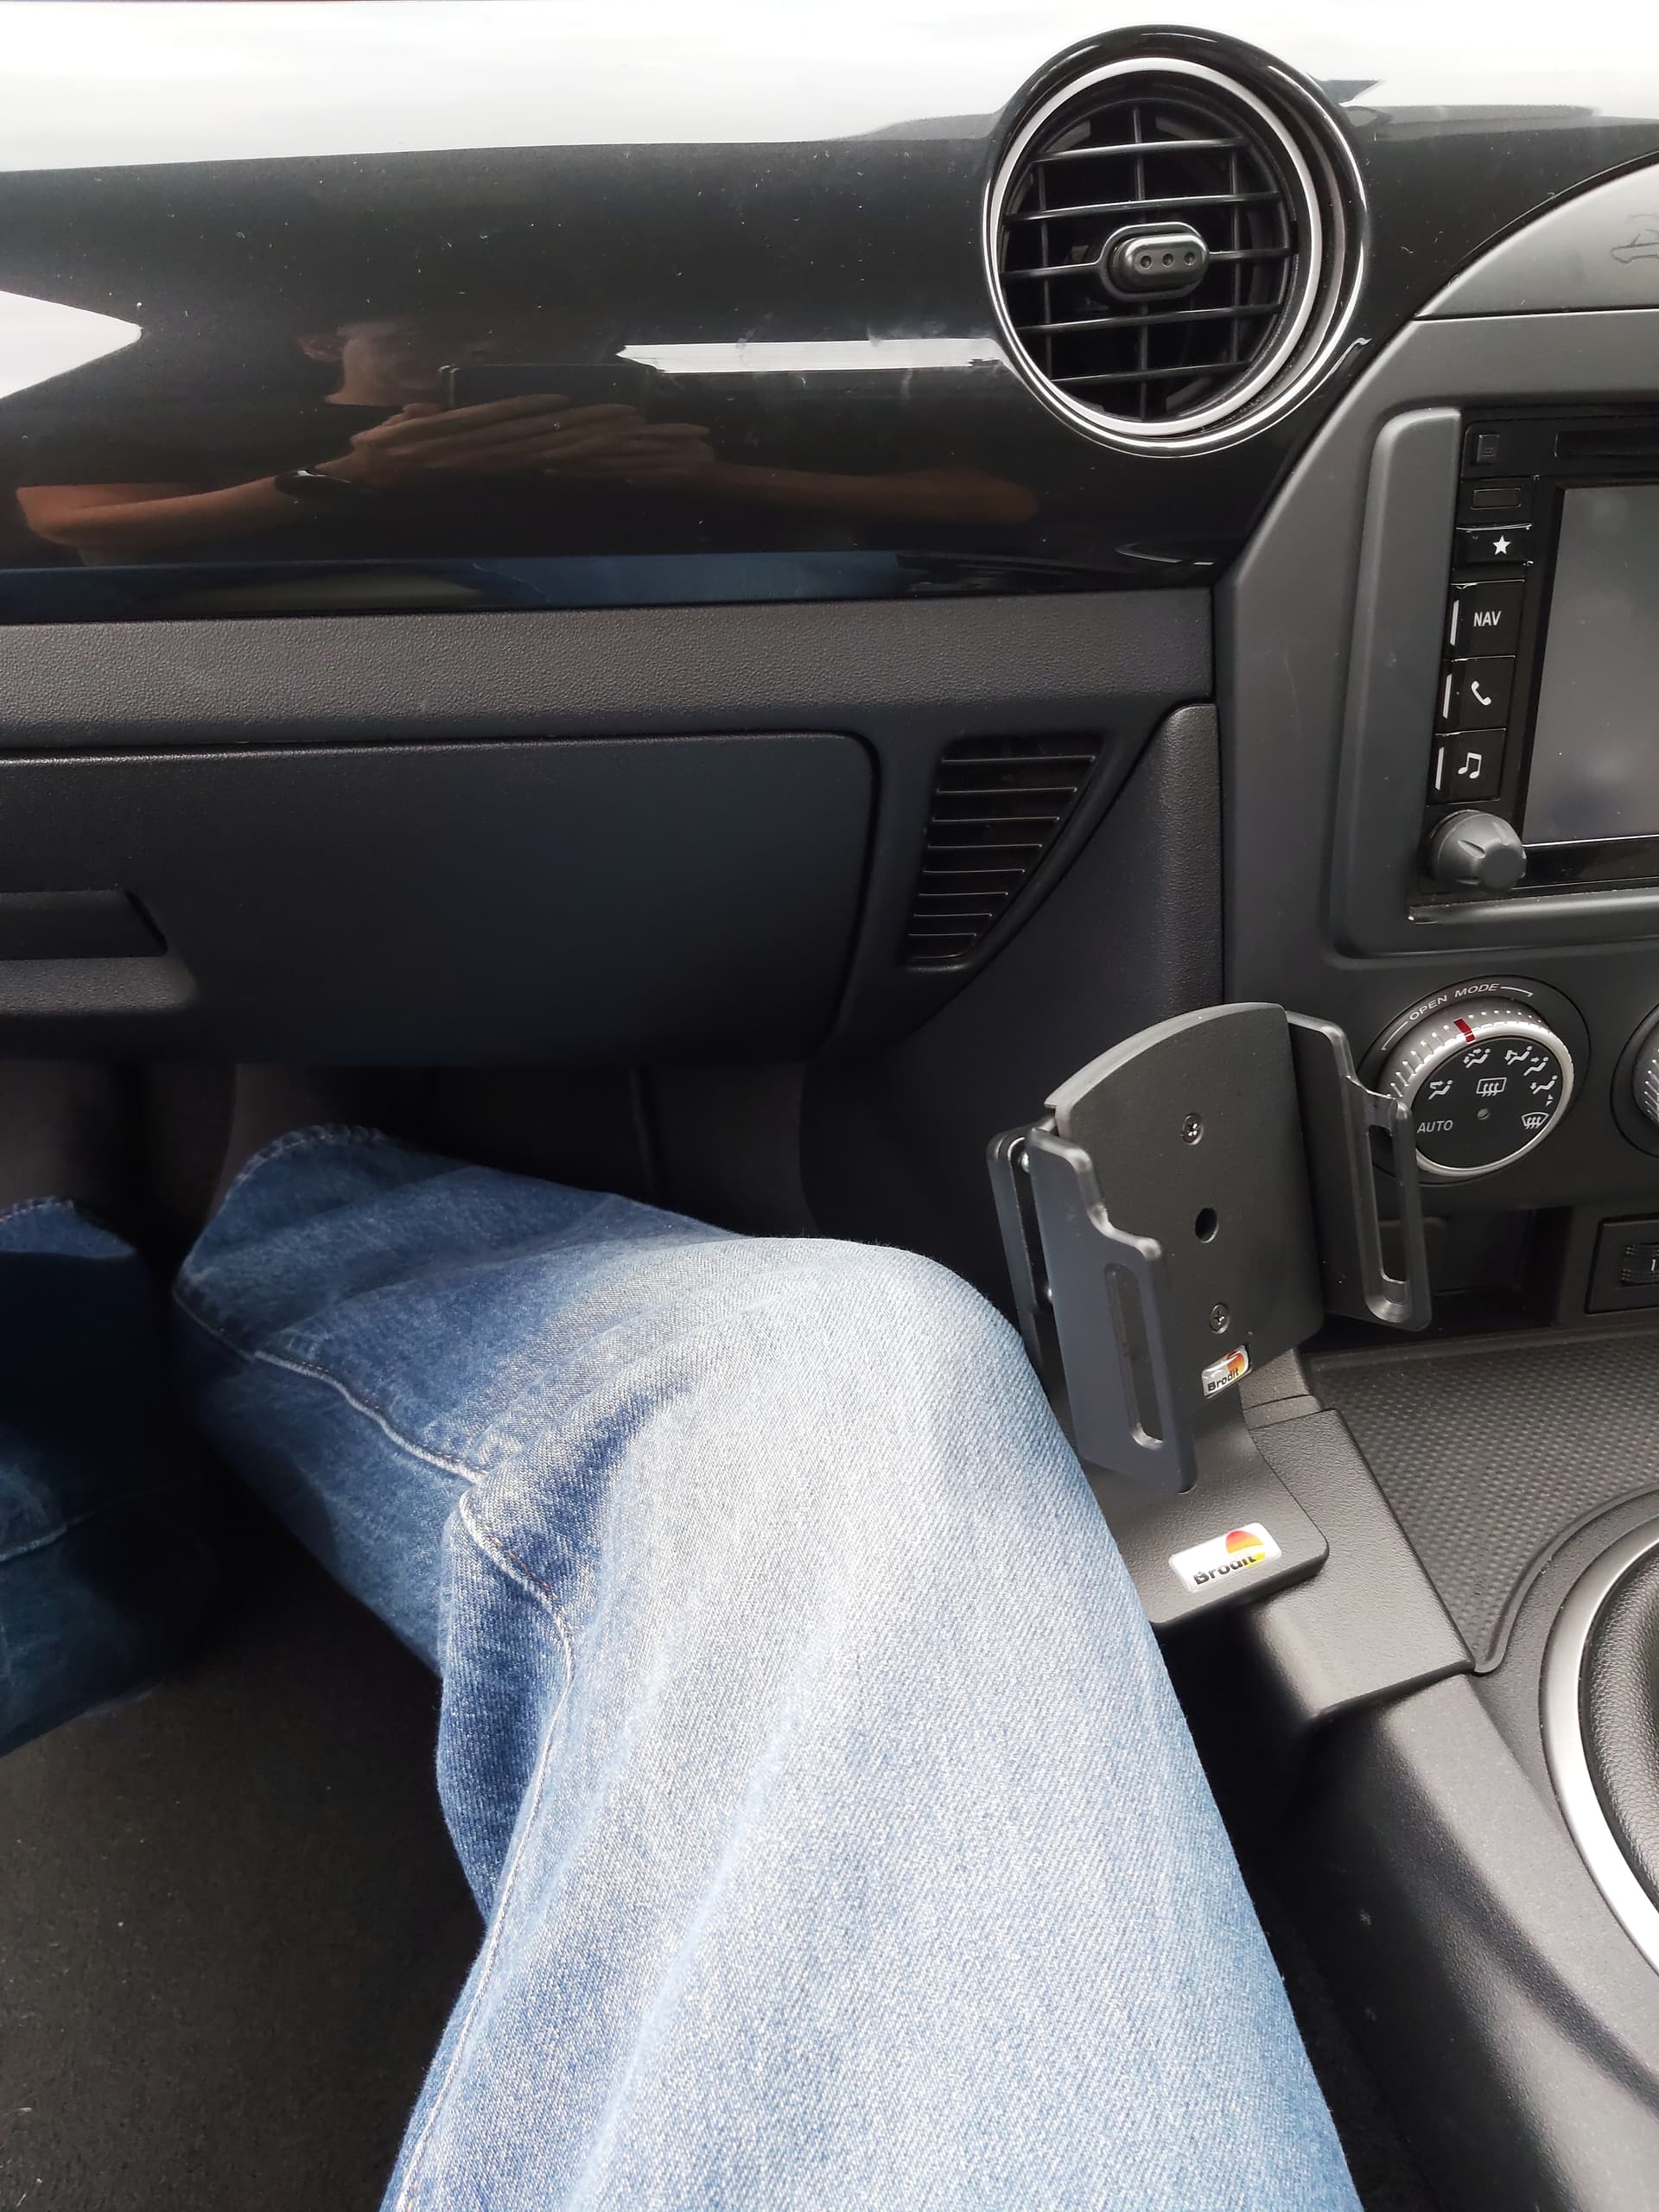 Brodit phone holder intruding on passenger leg space - Body, Interior &  Styling - MX-5 Owners Club Forum